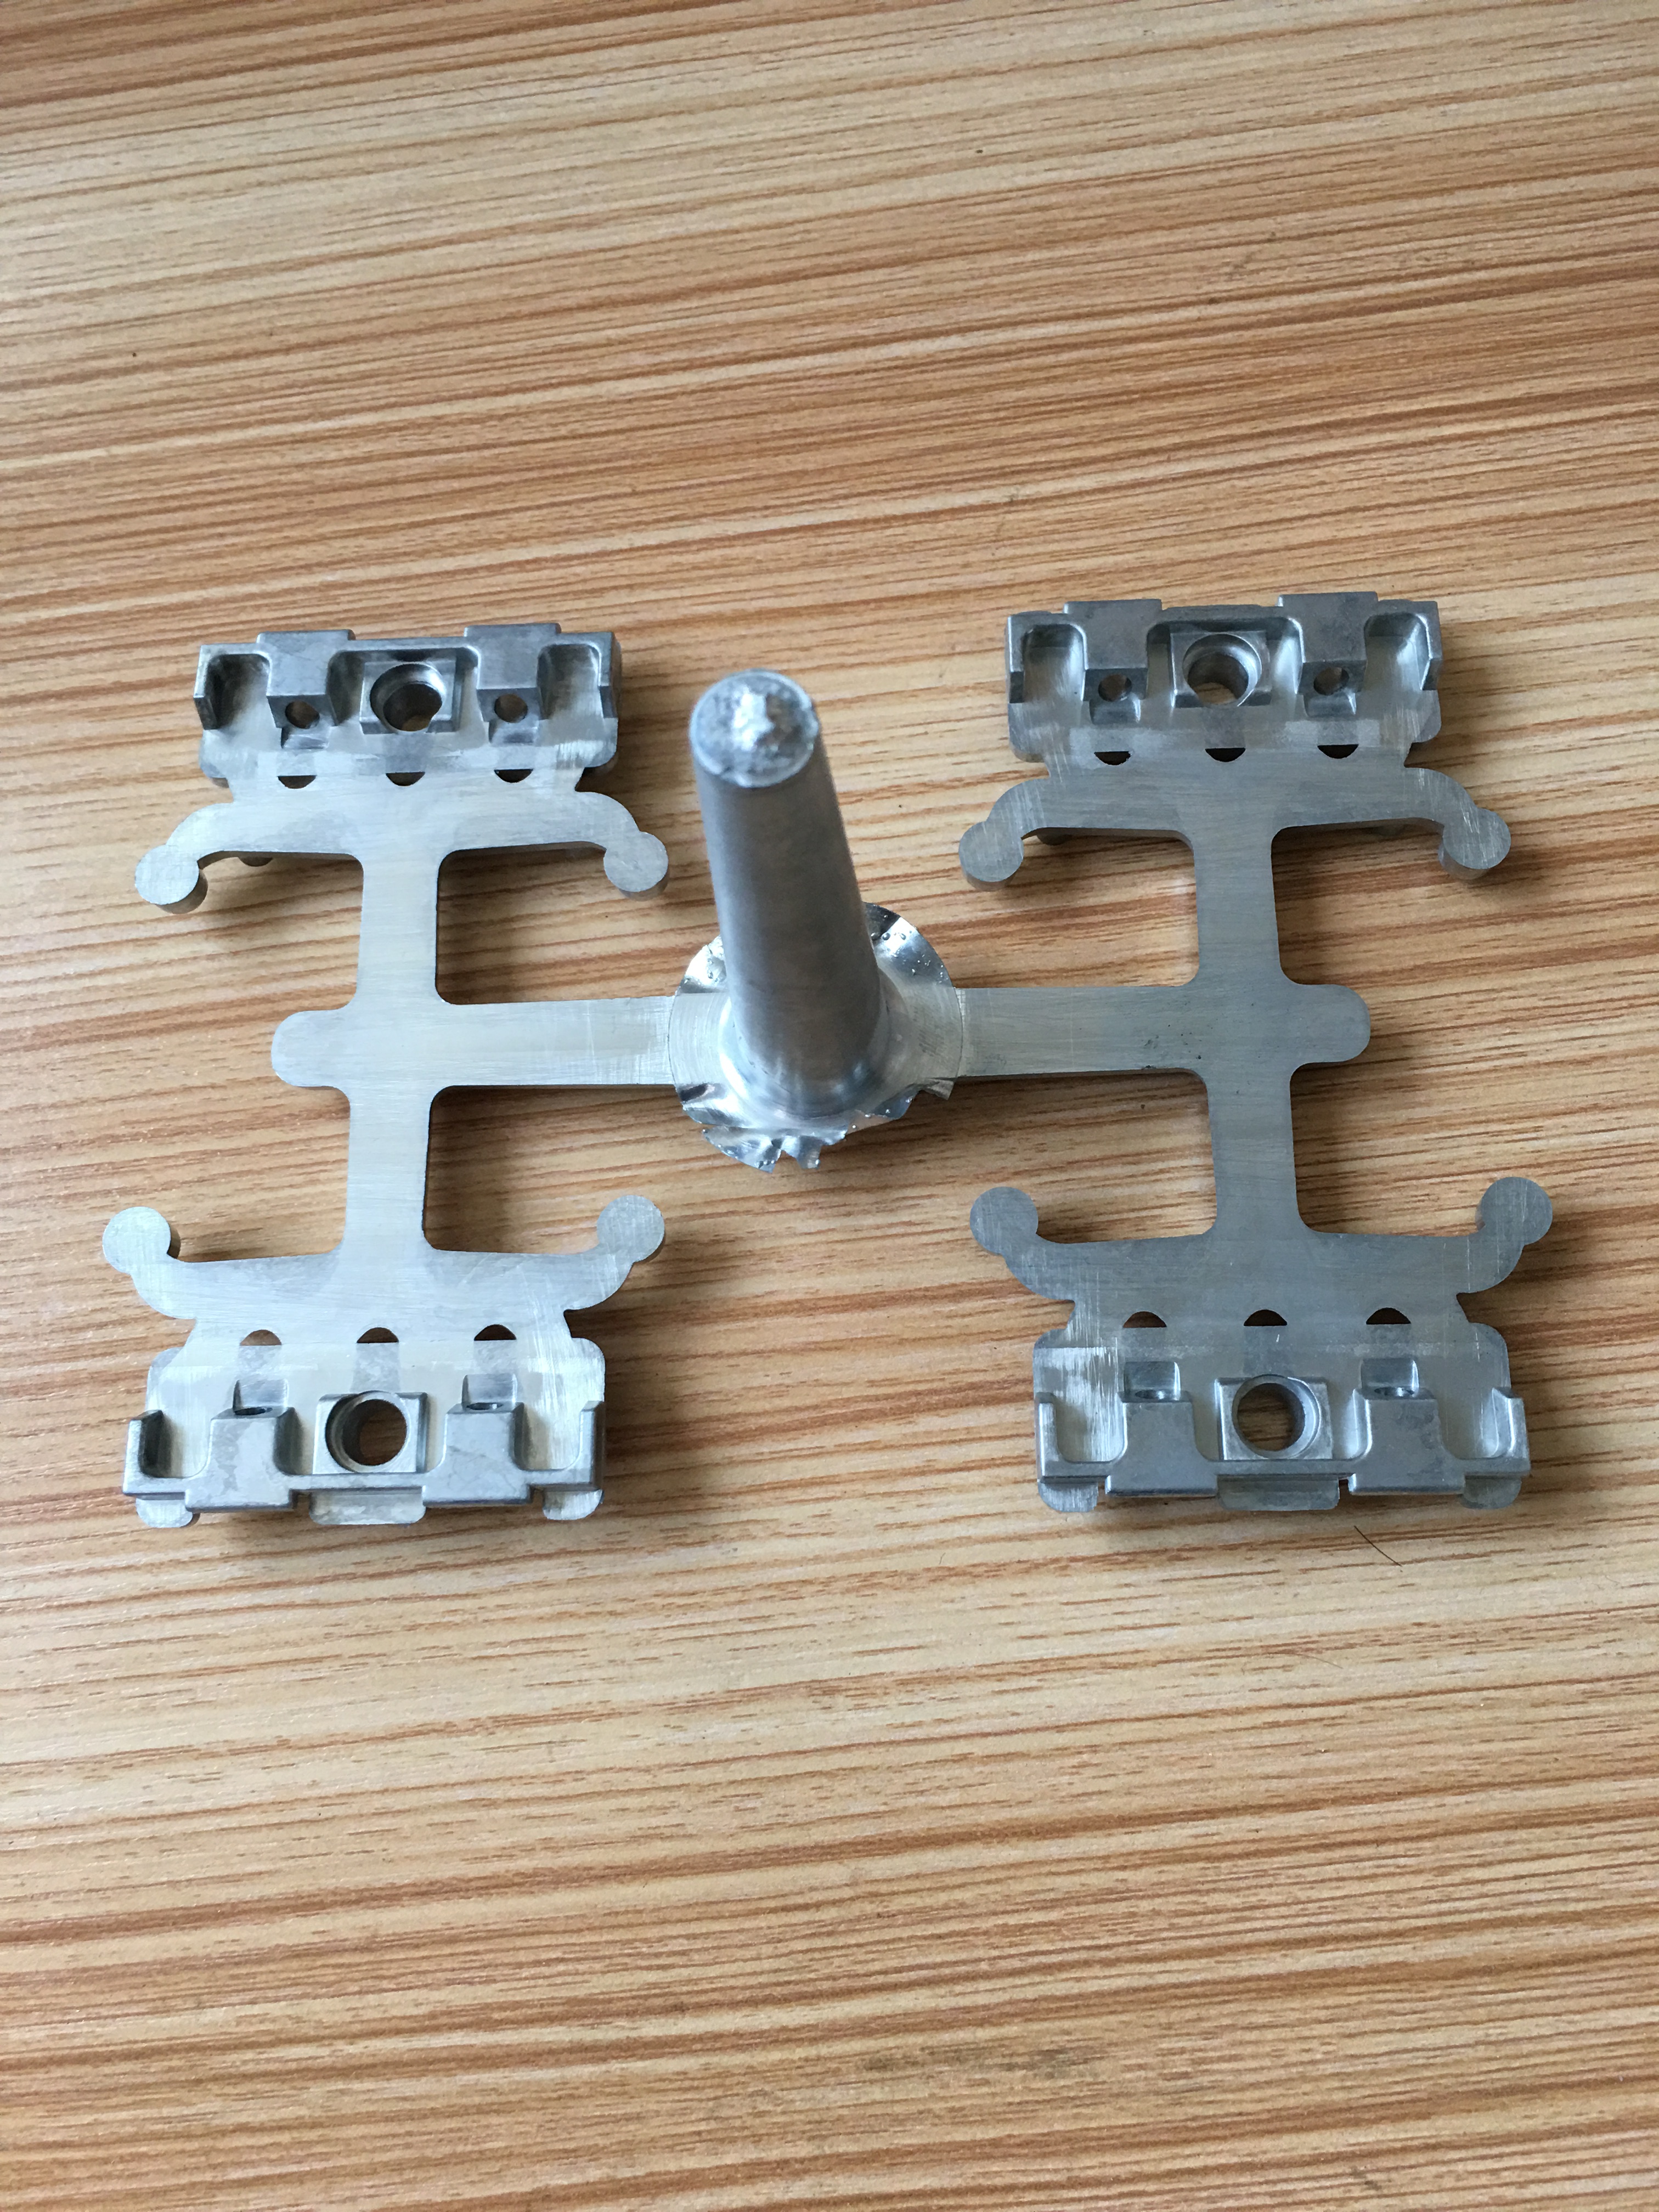 As a custom plastic injection mould factory,what is the process of creating a mold?